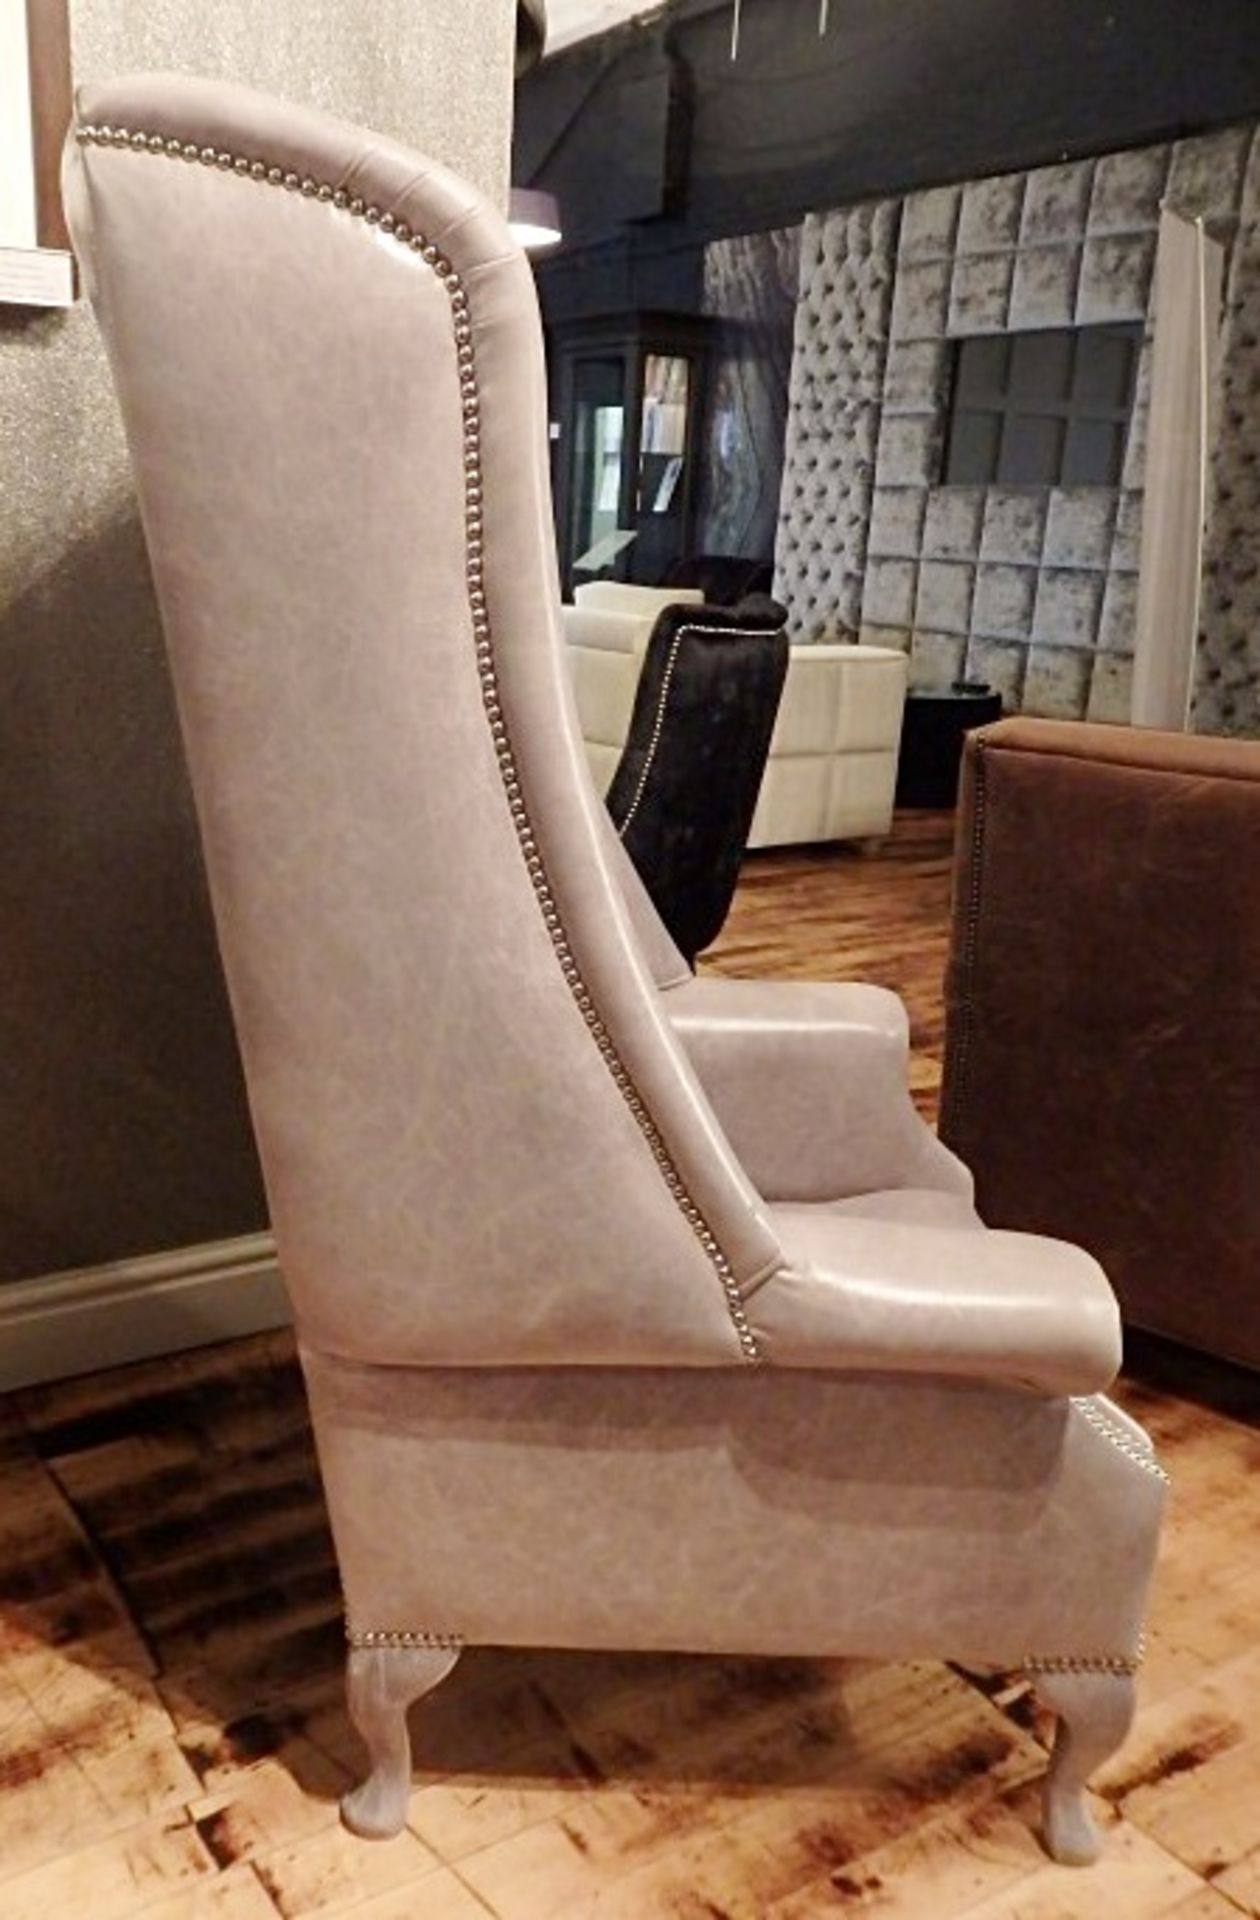 1 x Bespoke Handcrafted Button-Back Wing-Back Chair - Beautiful High-Back Chair In An Opulent Grey - Image 2 of 4